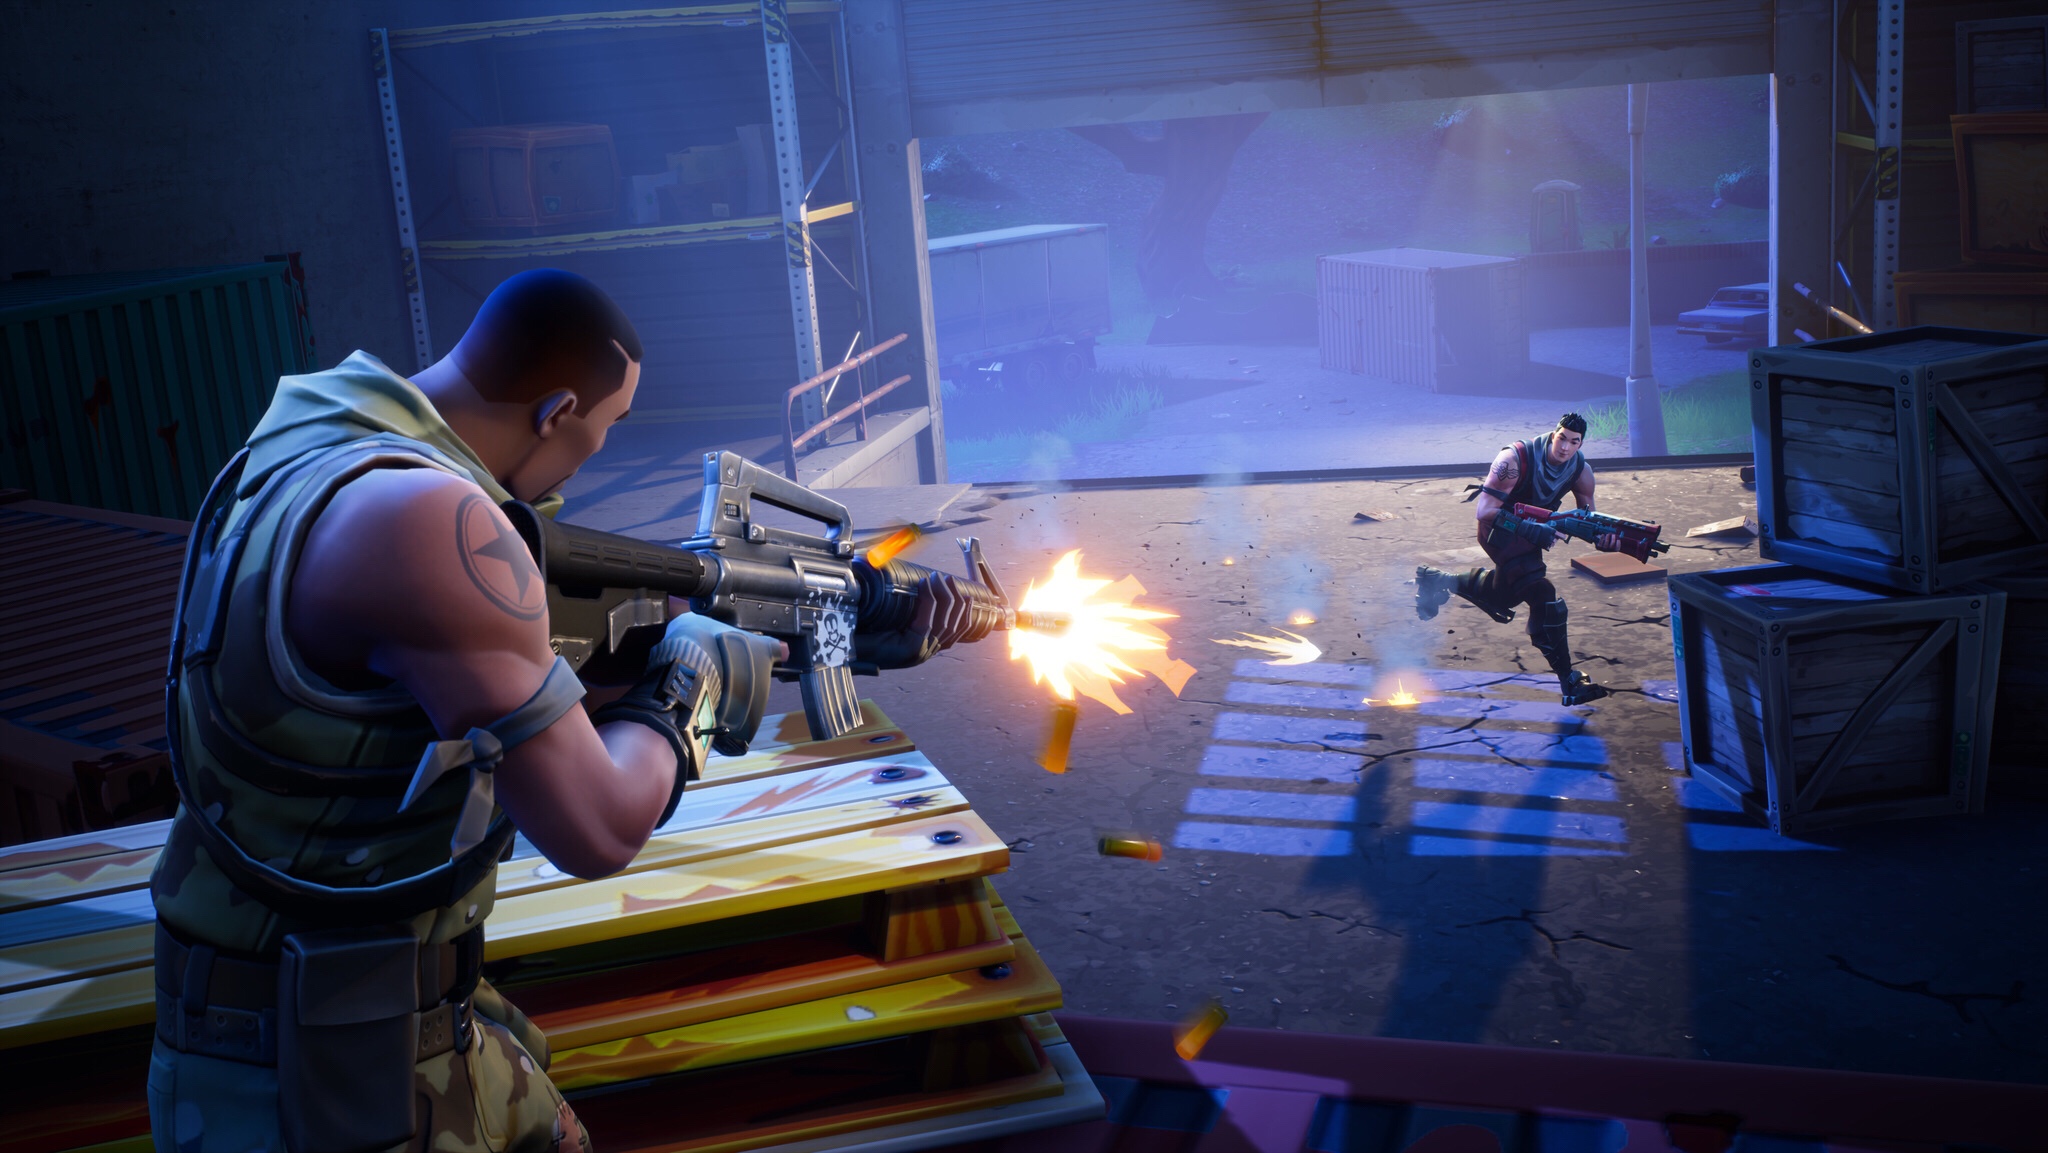 ‘Fortnite’ Battle Royale’ coming soon to your phones and tablets